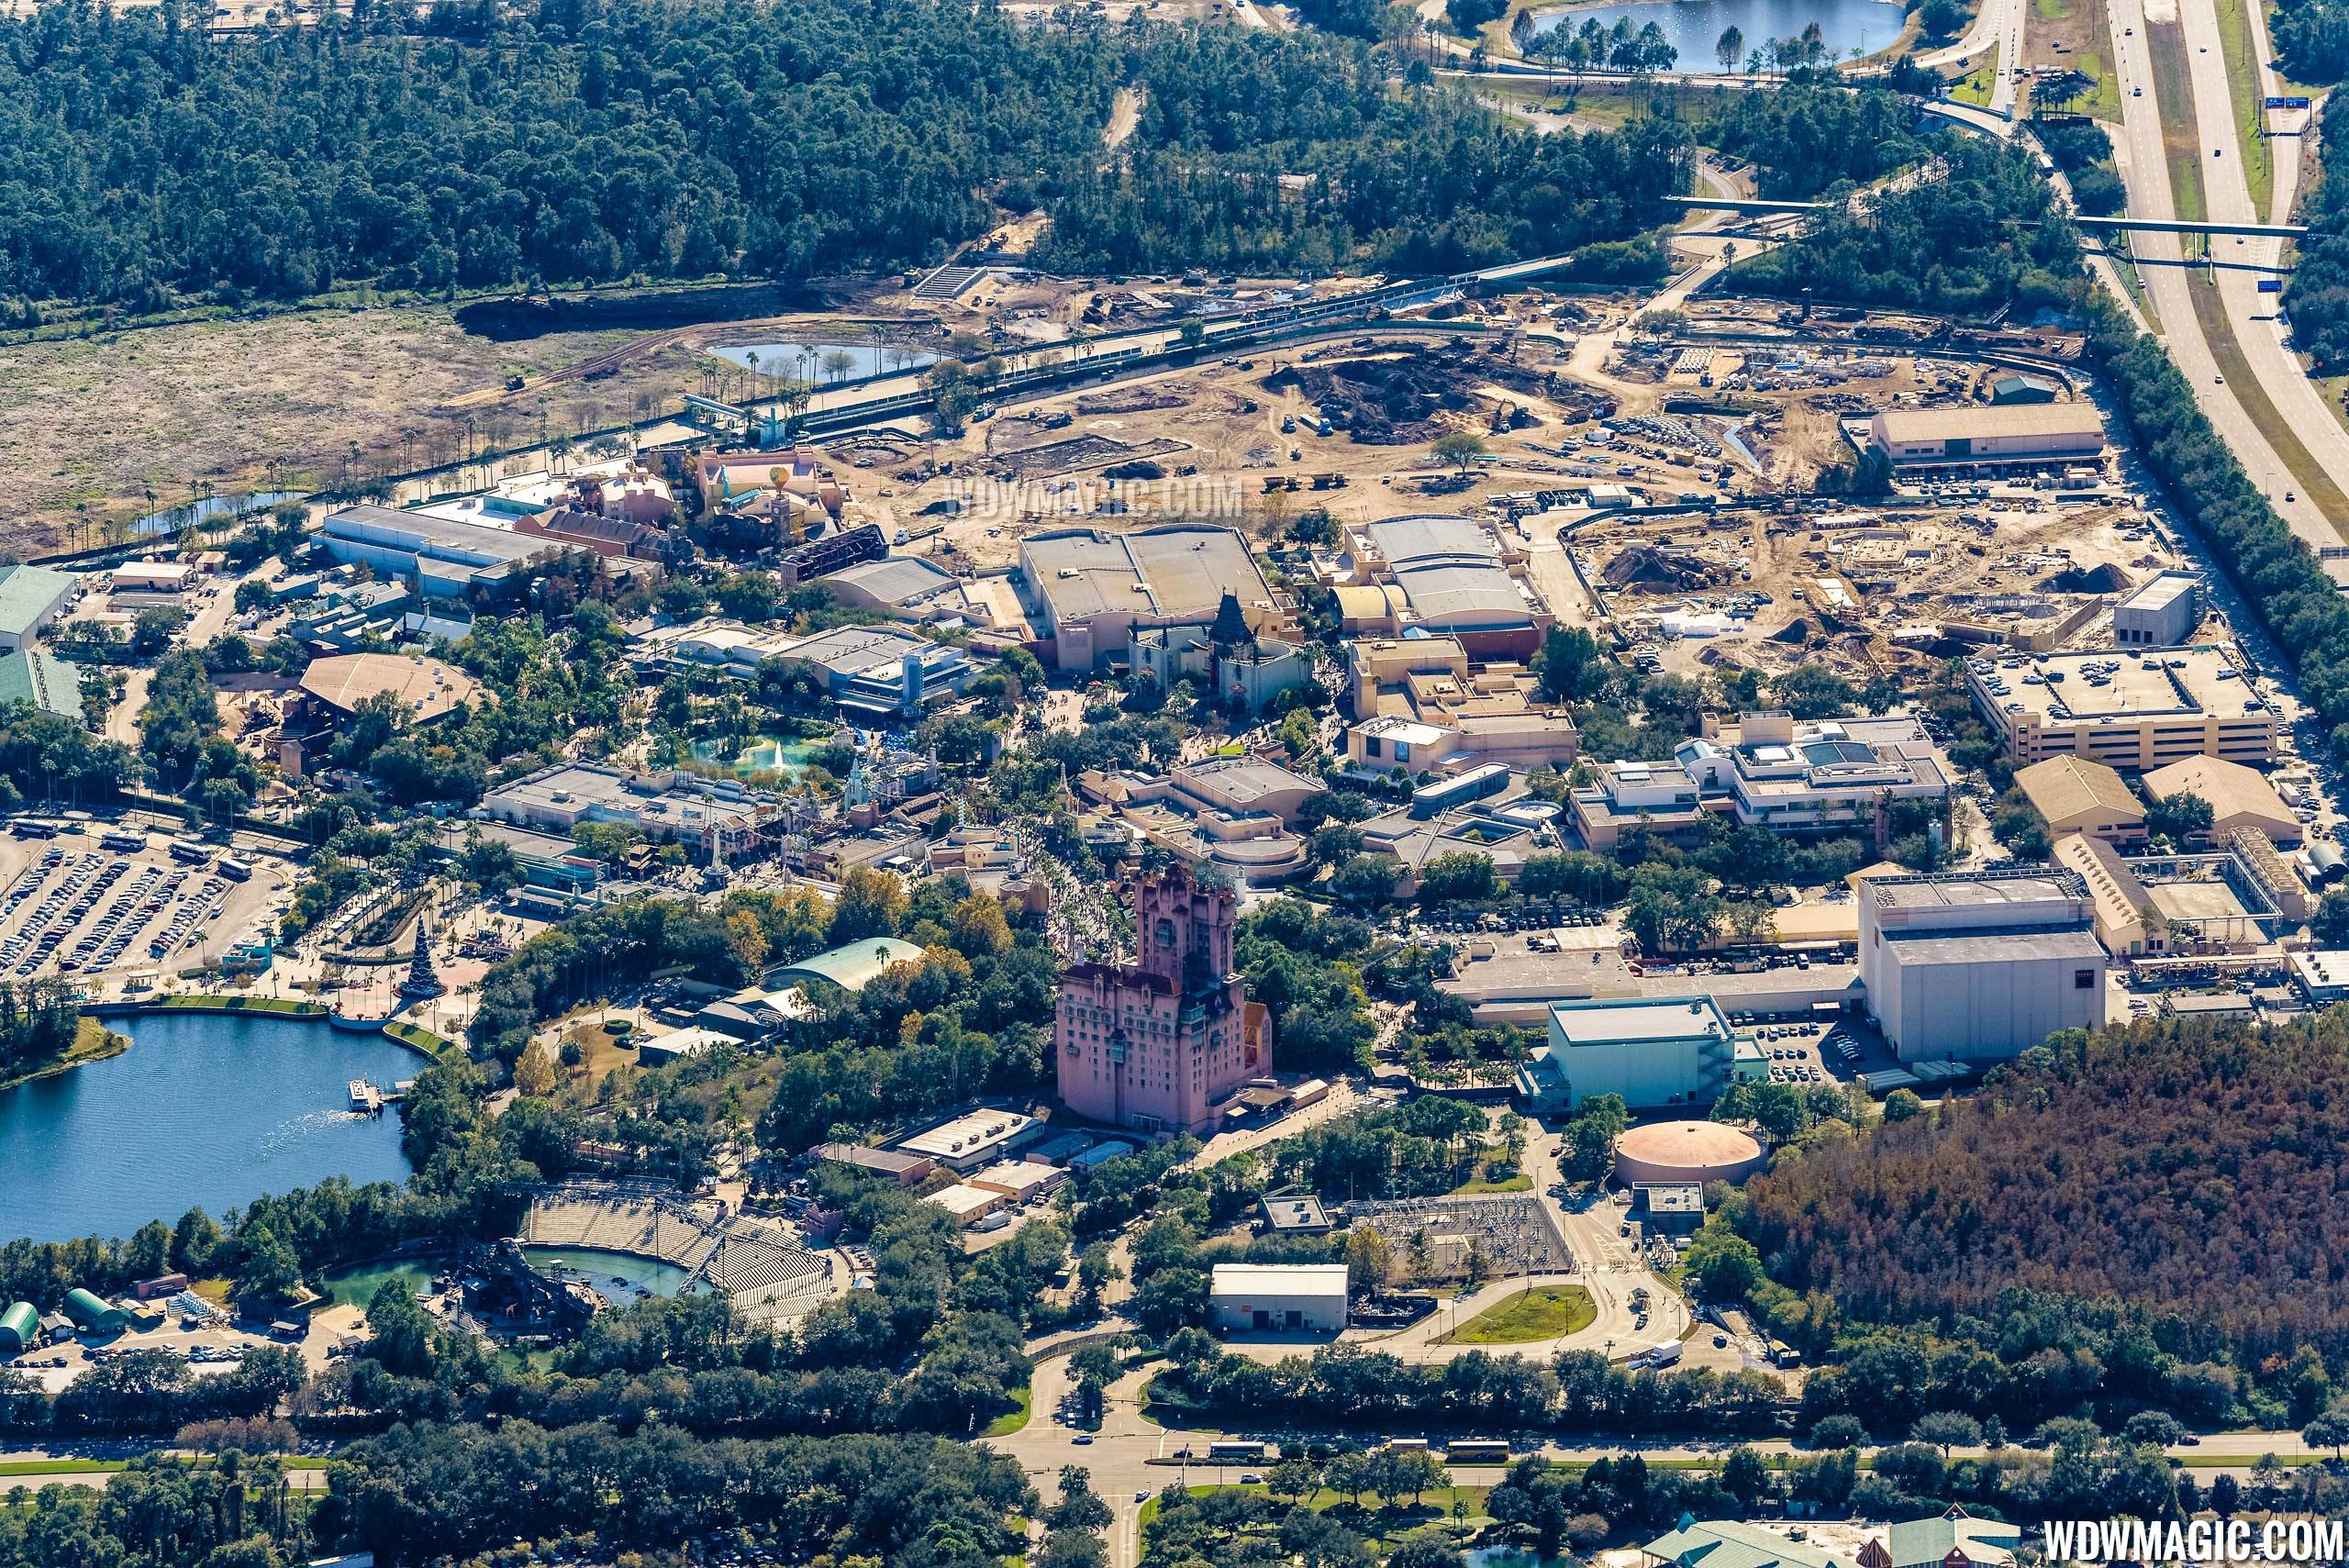 Photo by CJ Berzin @BerzinPhotography. Star Wars Land has the luxury of space to expand beyond just a theme-park land.